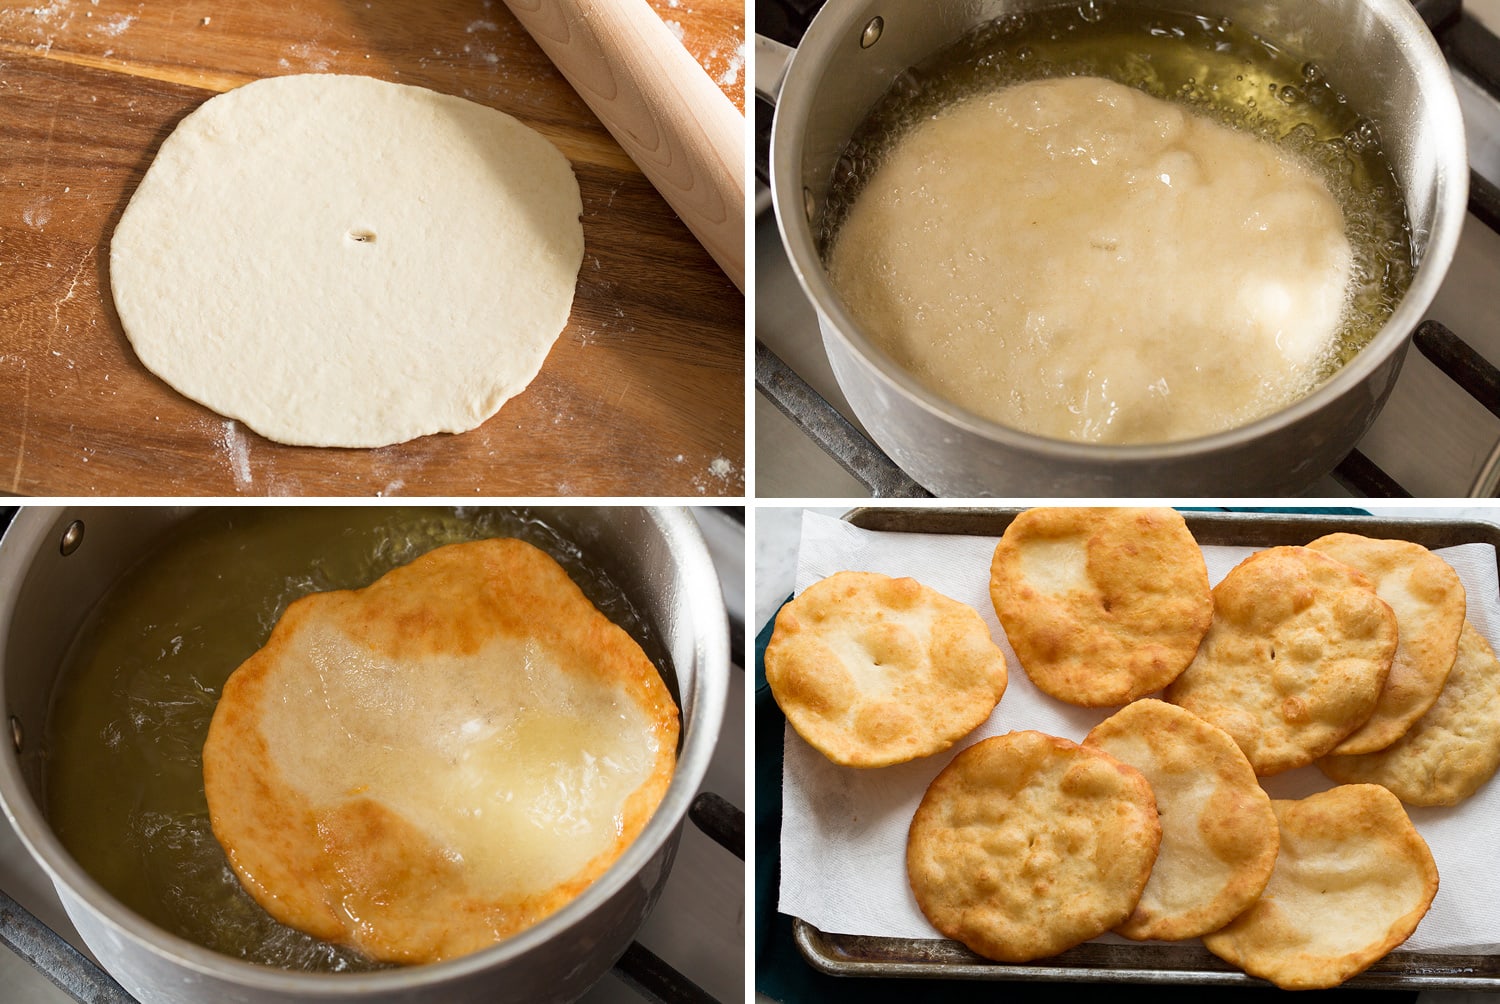 Continued steps showing how to deep fry Navajo fry bread.